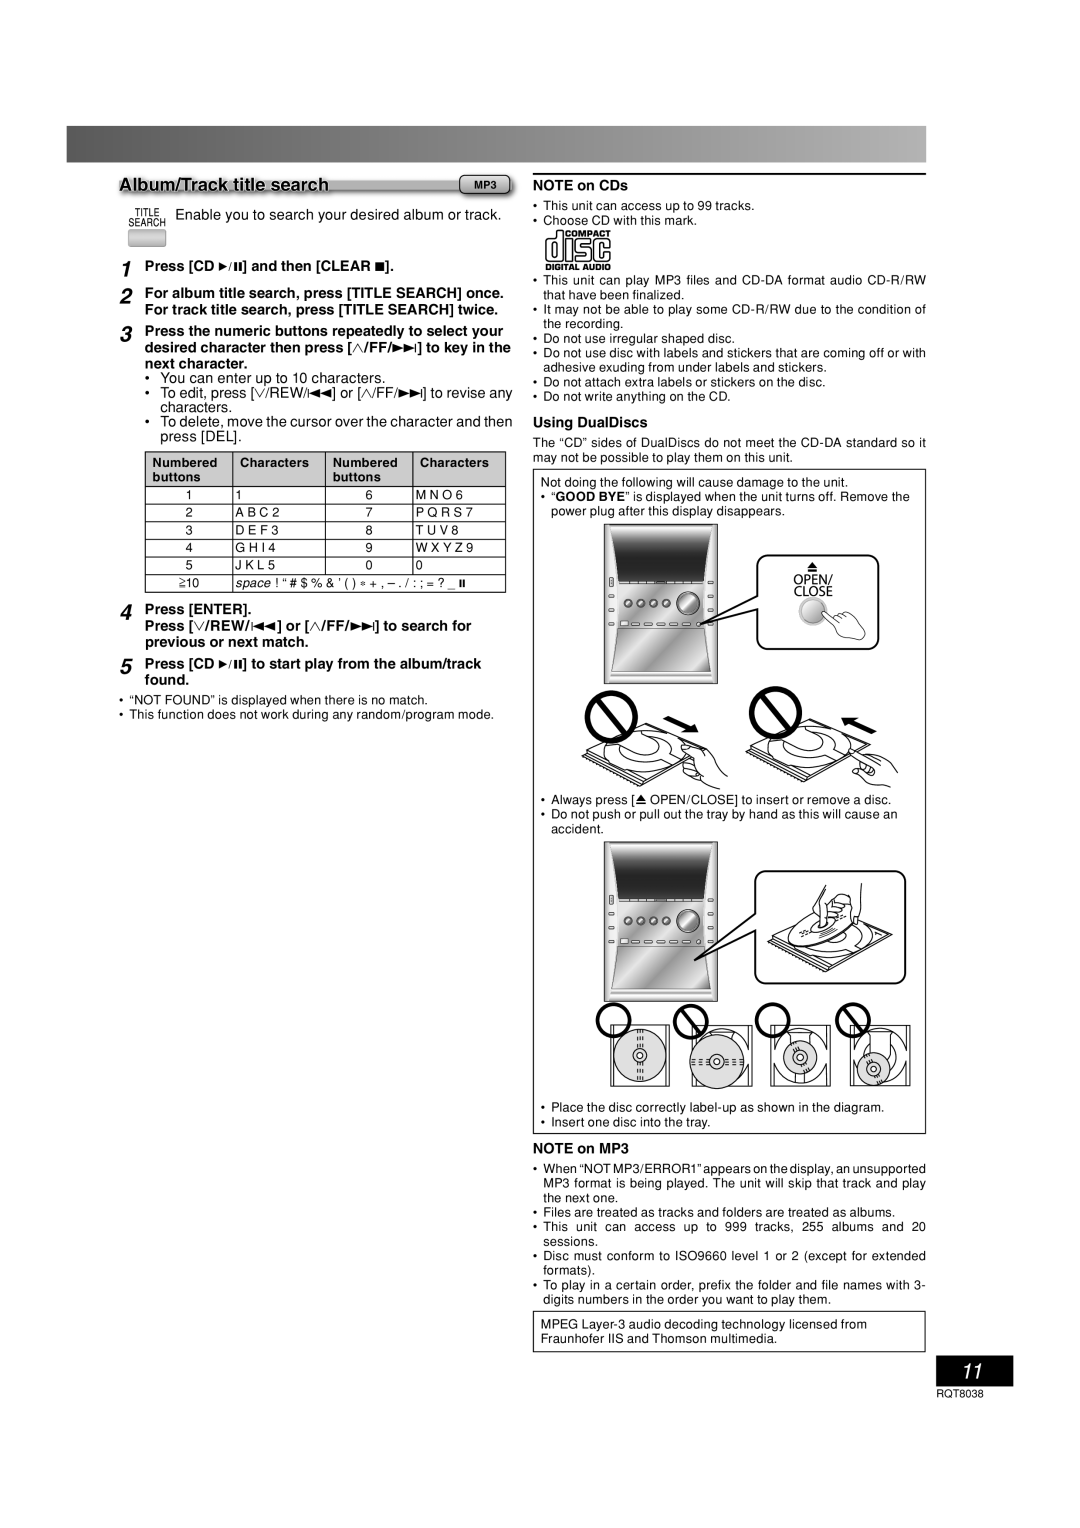 Panasonic SC-PM41 important safety instructions Album/Track title search 